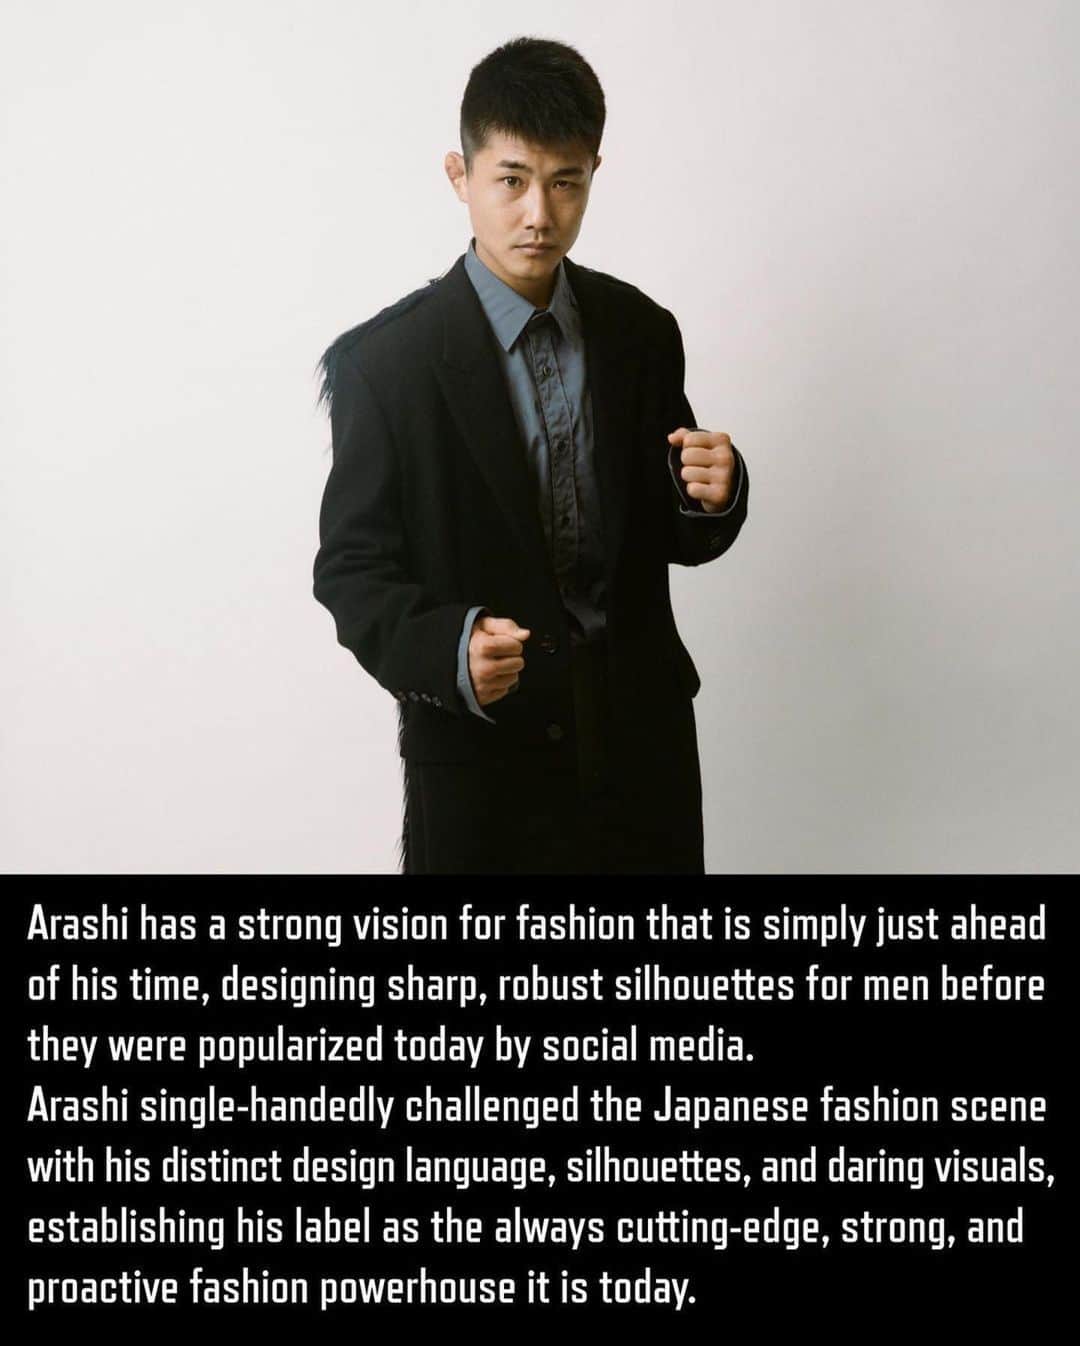 ジョンローレンスサリバンさんのインスタグラム写真 - (ジョンローレンスサリバンInstagram)「#Repost @sabukaru.online ・・・ Now Online: Arashi Yanagawa - A Designer Truly Ahead Of His Time  From revolutionizing the art of modern tailoring to establishing one the most influential fashion labels in Japan, Arashi Yanagawa [@arashi_yanagawa] is not only a designer but a whole character, a style icon, a fashion visionaire, and nonetheless, a Sabukaru favorite.  Arashi Yanagawa, before being known today as the designer of Japanese clothing label JOHN LAWRENCE SULLIVAN [@johnlawrencesullivan_official], used to pursue a professional boxing career at a young age. He was so talented at boxing, to the extent that by the end of high school, he was scouted by a Japanese university, which eventually led to him becoming an Olympic candidate for Japan.  Arashi’s fashion career is just as exciting as his career in sports. He started working on fashion around 2003, and with no formal education, he followed his strong sense of fashion and decided to give it a shot—a decision that lasted well over 20 years. Arashi has a strong vision for fashion that is simply just ahead of his time, designing sharp, robust silhouettes for men before they were popularized today by social media. Arashi single-handedly challenged the Japanese fashion scene with his distinct design language, silhouettes, and daring visuals, establishing his label as the always cutting-edge, strong, and proactive fashion powerhouse it is today.  We teamed up with photographer Federico Radaelli [@federico_radaelli] to create visuals starring boxers from Kaneko GYM - where Arashi currently trains at- styled in JOHN LAWRENCE SULLIVAN outfits, exclusively for today’s article. Hereby we proudly present to you our interview with the former professional boxer and fashion trailblazer Arashi Yanagawa!  [Full Interview in our Link in Bio]  Photographer @federico_radaelli  Produced by @bianco_bianco_tokyo  Producers @martaespinosa__ @mrbianco @federico_radaelli  Styling by @domsyn  Models from @kanekoboxing  Special Thanks @kanekoboxing & @h8nn7」1月20日 21時23分 - johnlawrencesullivan_official